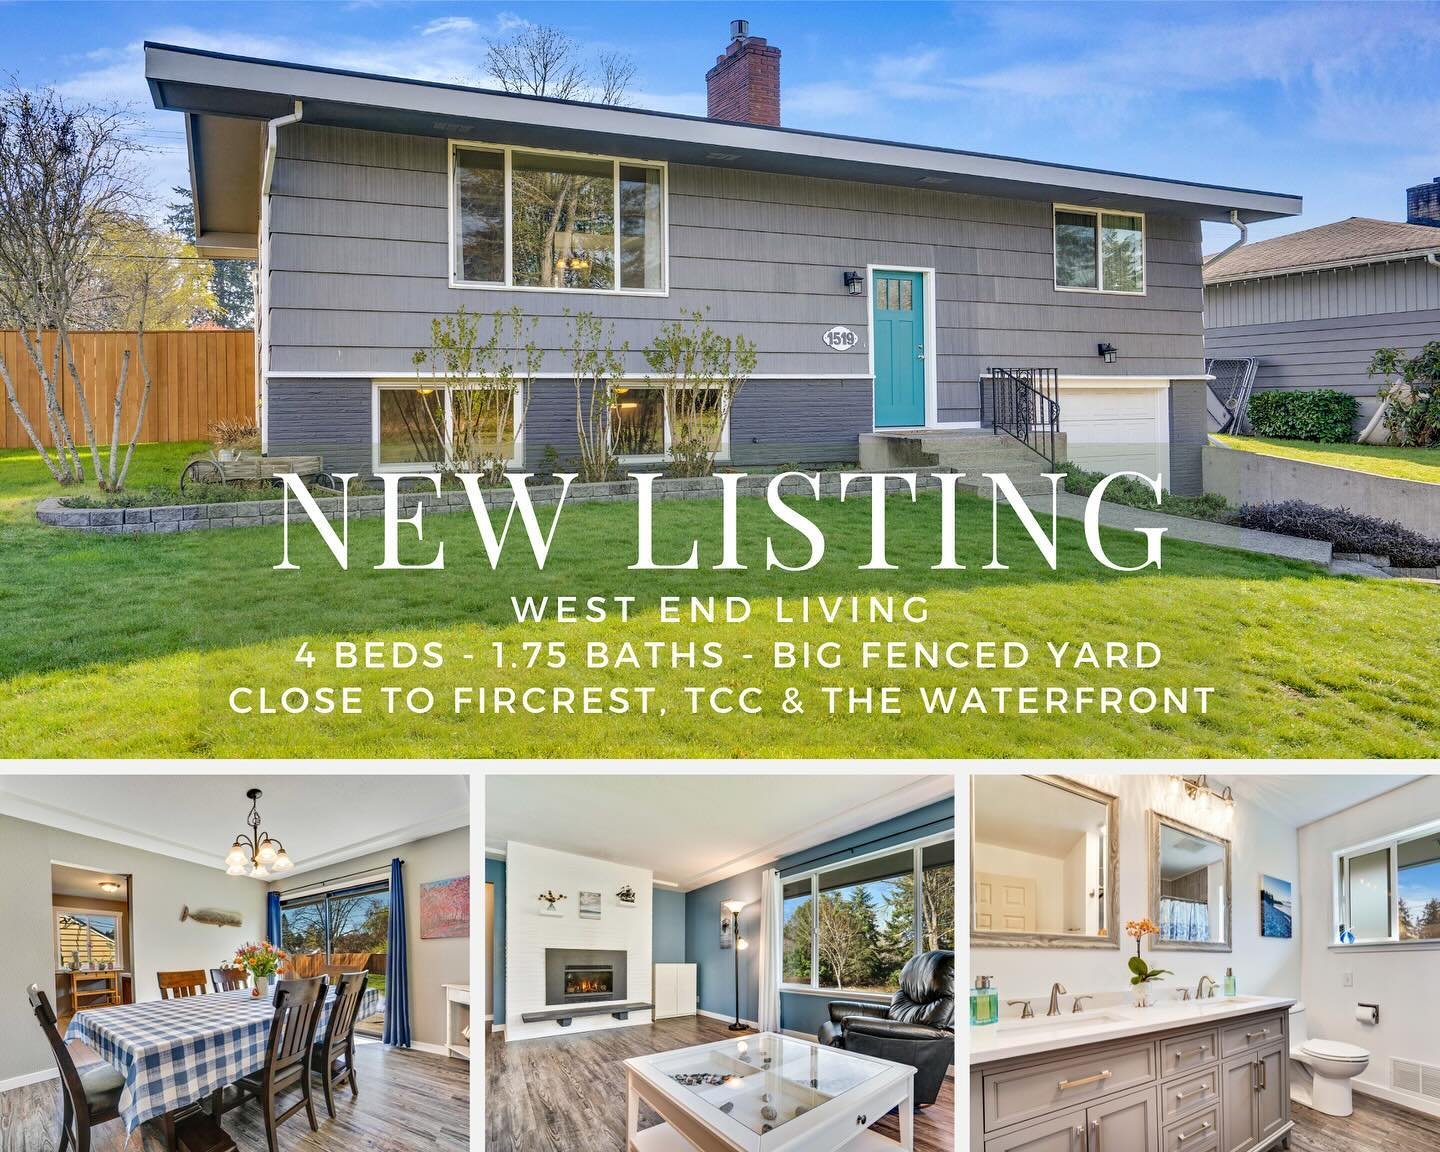 🌅 Live in town and look out at sunsets through the trees from this updated West End home by Fircrest. With so much recent renovation and care, you&rsquo;ll truly be able to enjoy all the space on this large lot. From updated flooring, windows and pl